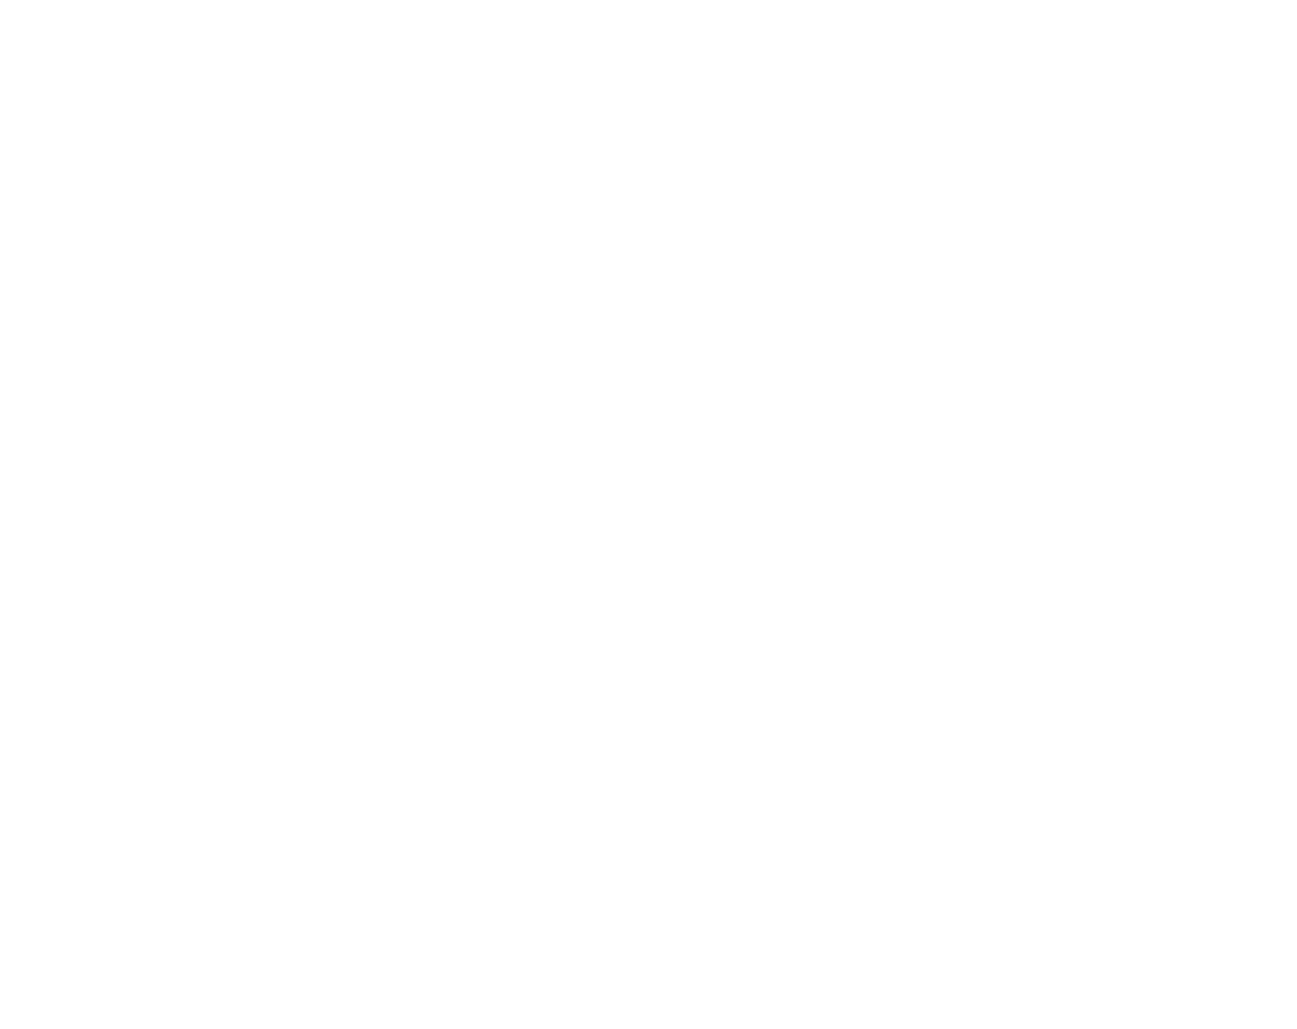 Students in kindergarten and years 1 and 2 have their own garden beds, growing tomatoes, strawberries, parsley and be...